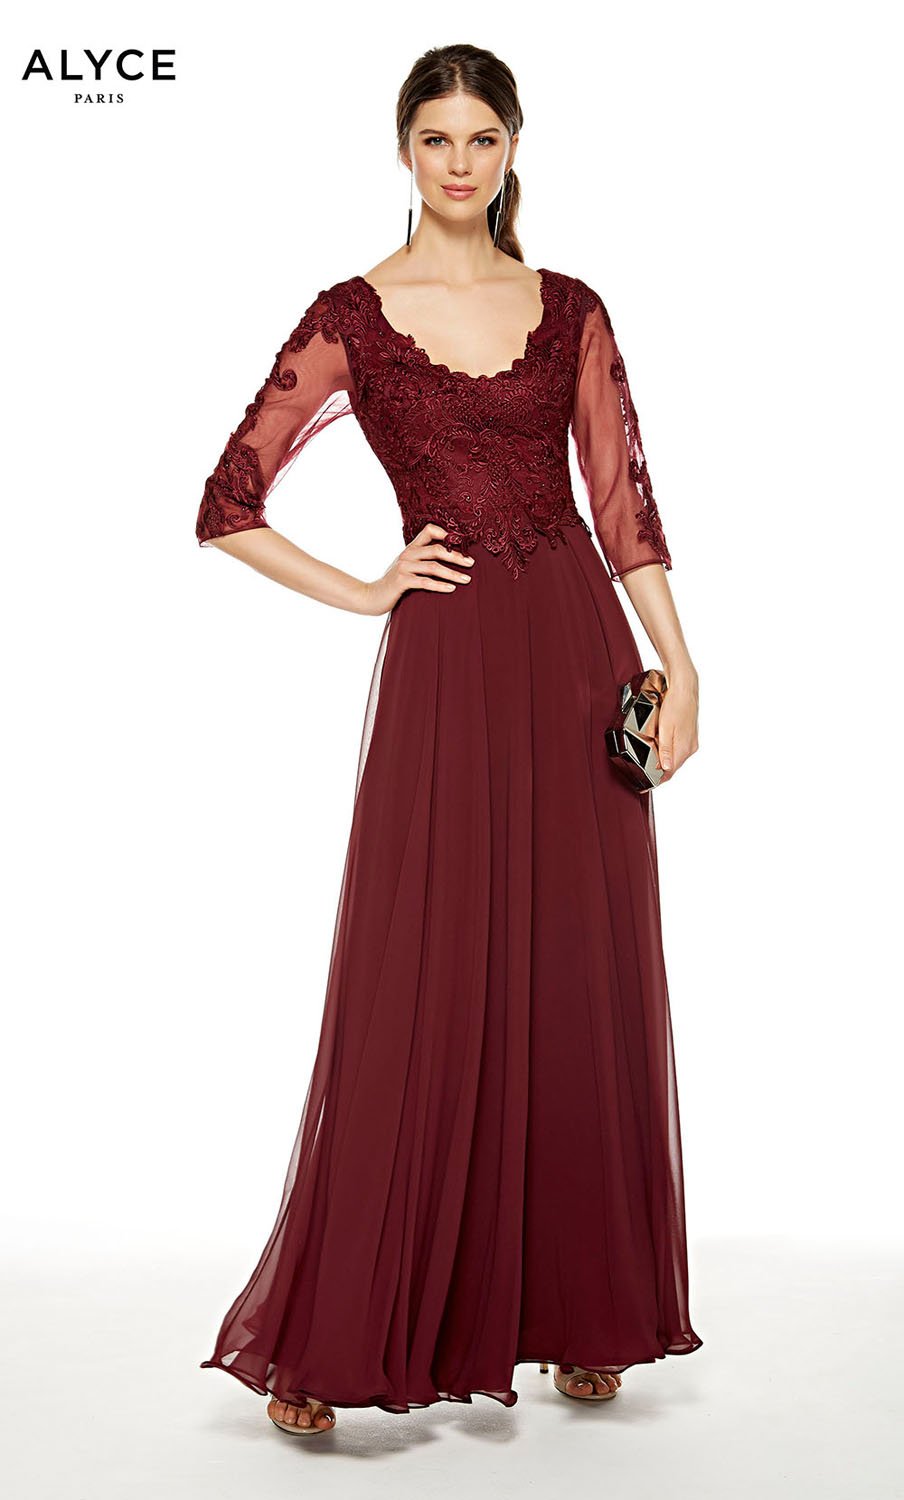 Alyce Paris 27385 dress images in these colors: Black Cherry, Navy, Champagne.